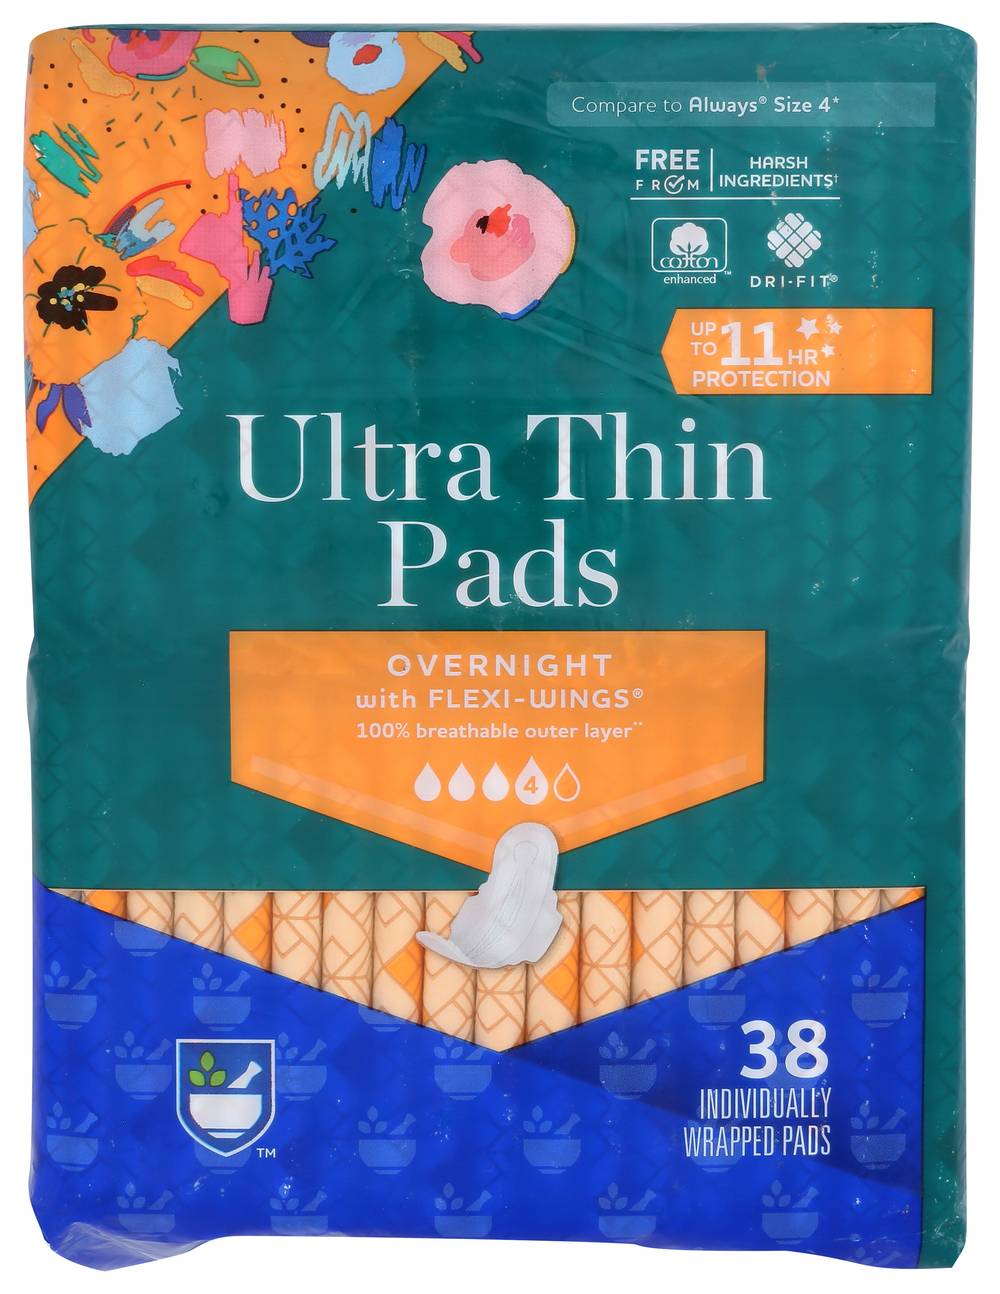 Rite Aid Ultra Thin Pads Overnight Flexi Wings (38 ct)